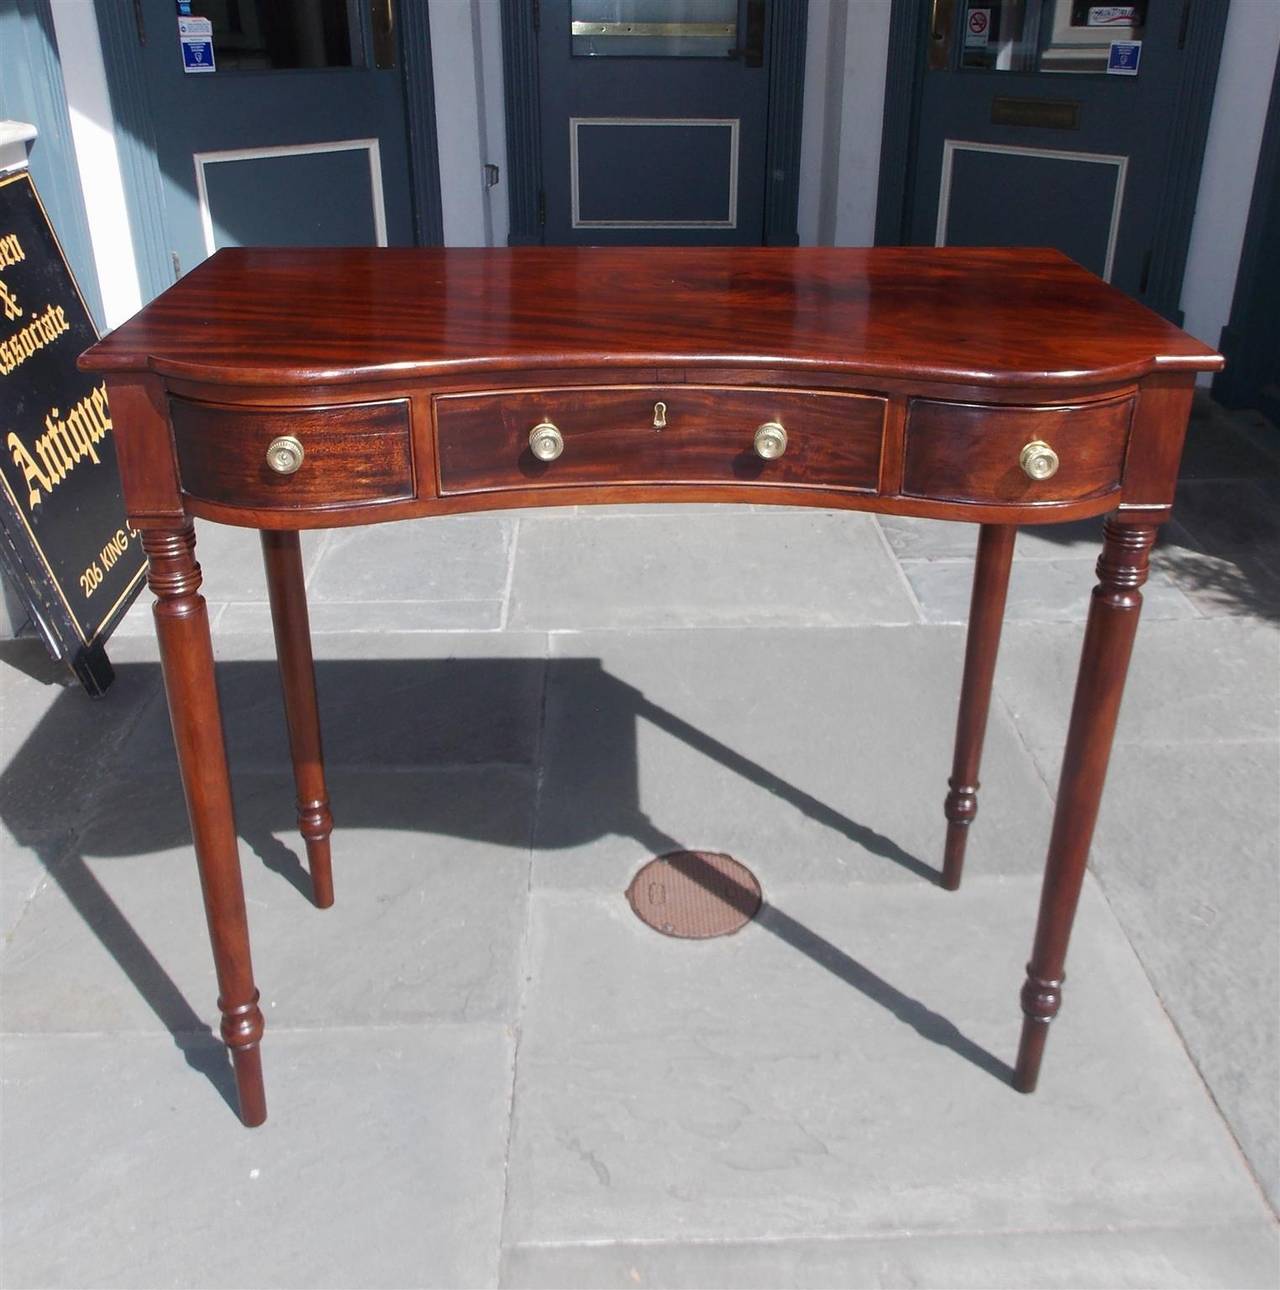 Jamaican mahogany serpentine three drawer server with a one board surface, original brasses, and terminating on the original turned bulbous ringed legs.  Early 19th Century.